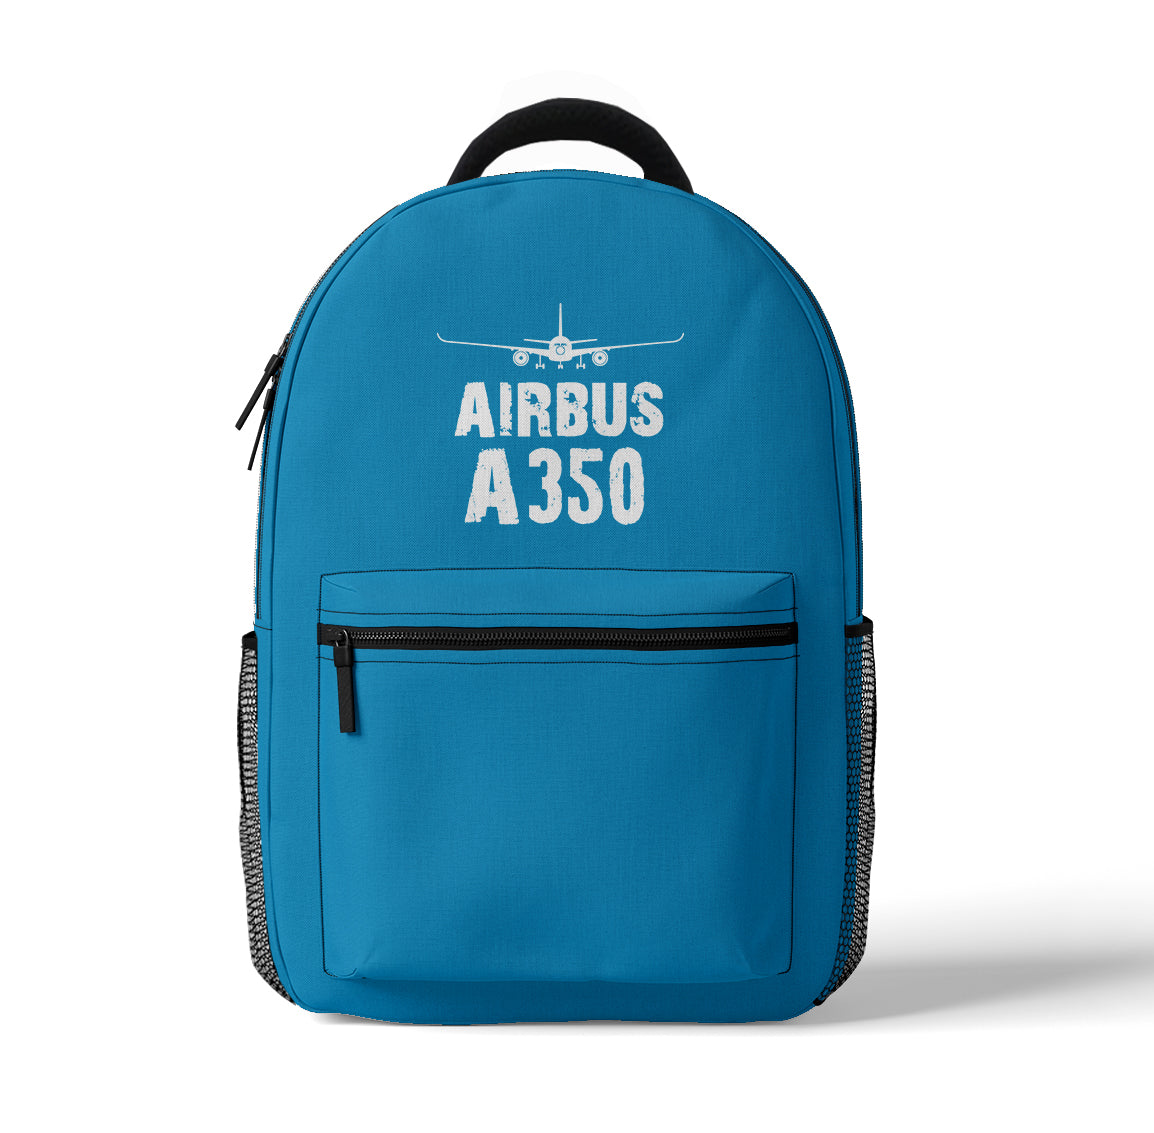 Airbus A350 & Plane Designed 3D Backpacks